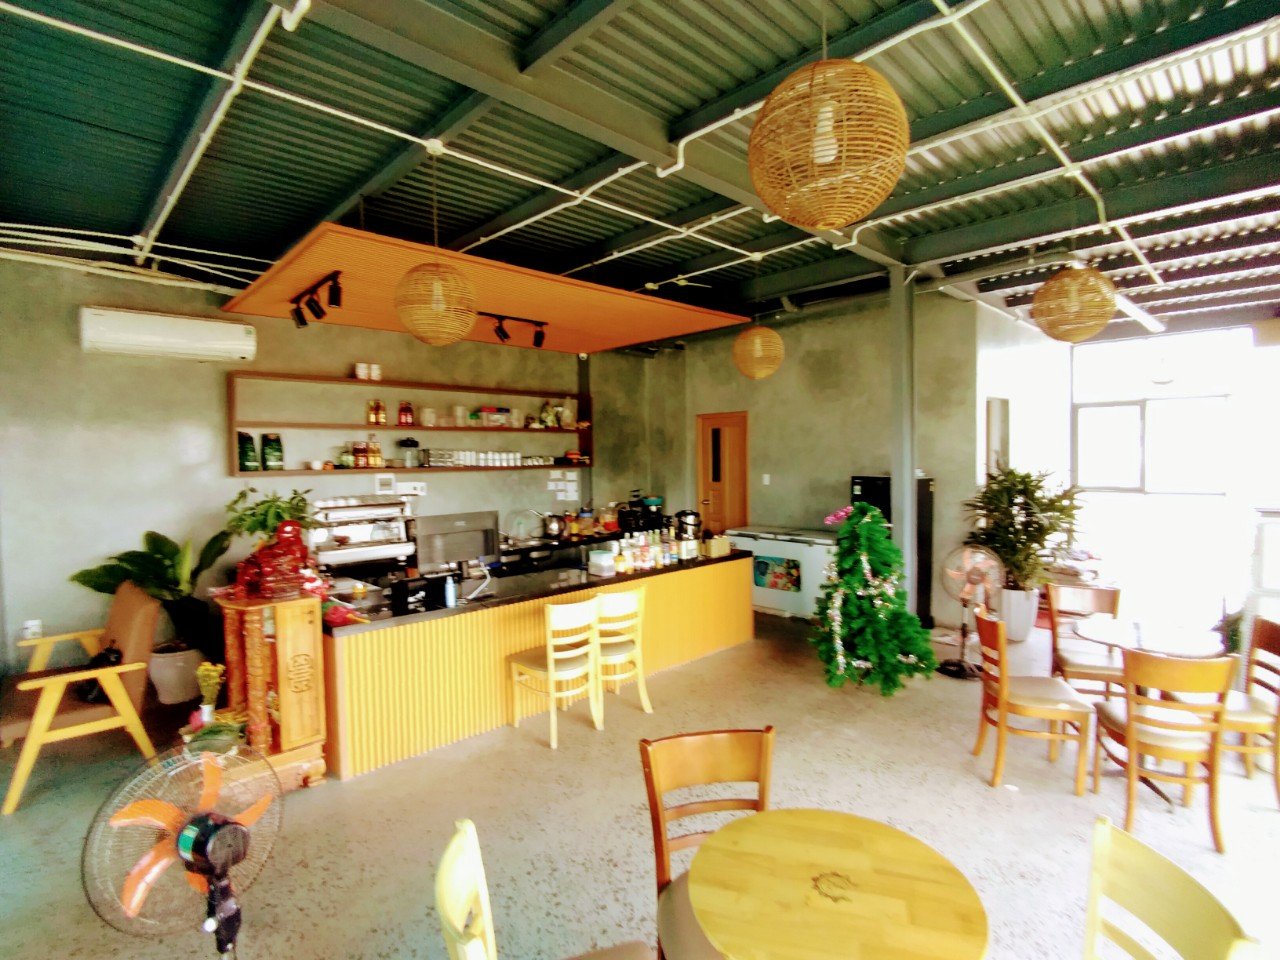 Commercial property For Rent in An Bang Hoi An